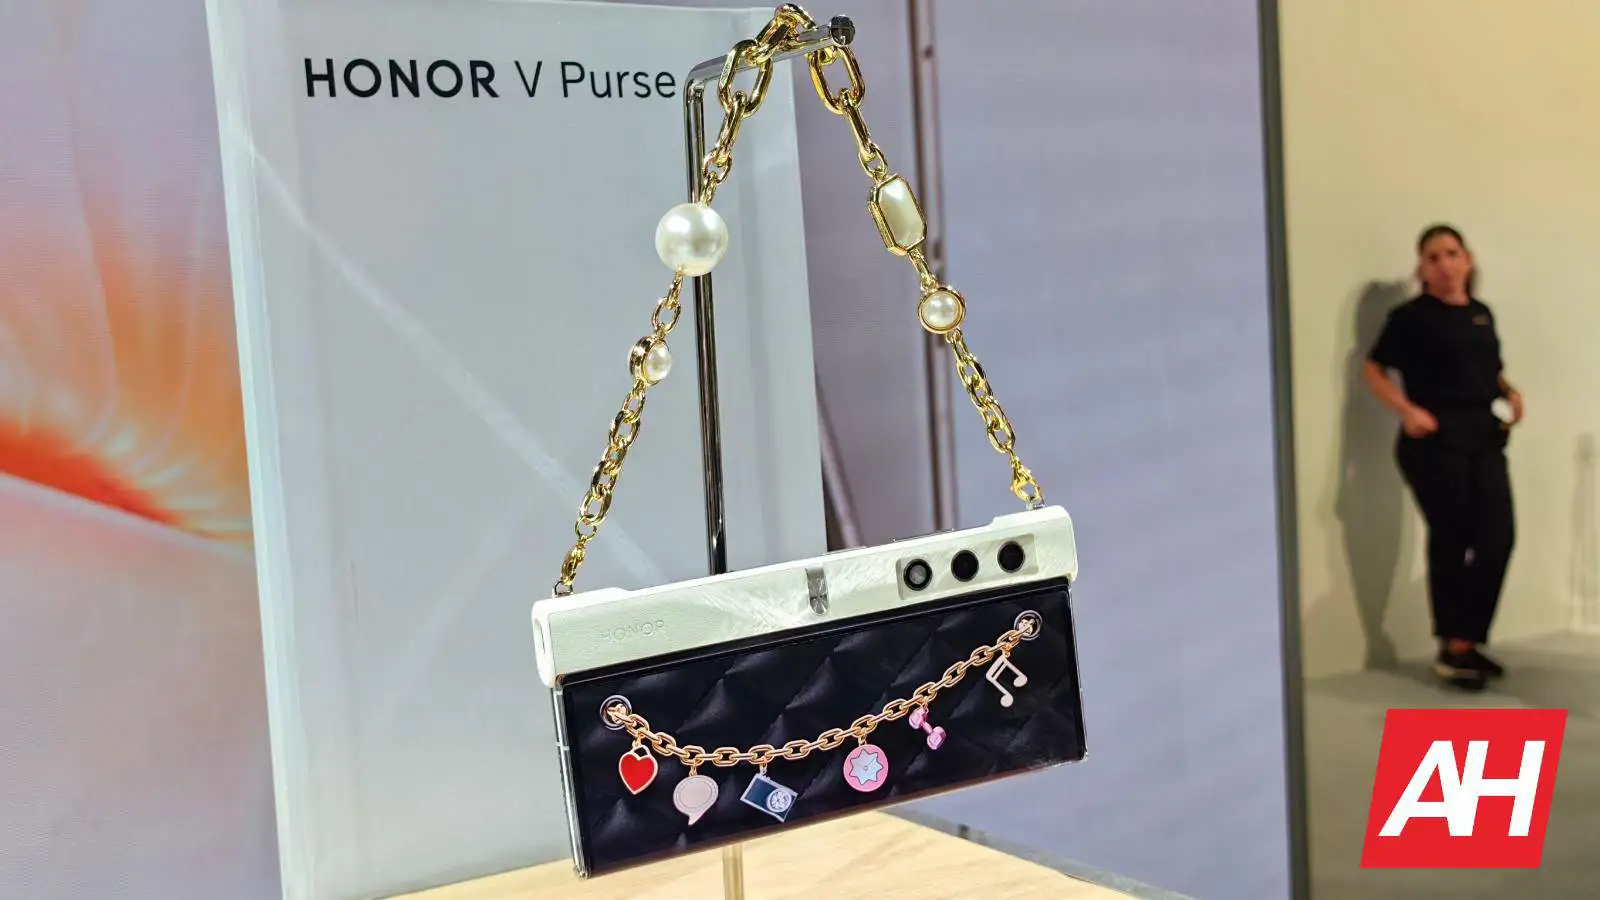 Honor V Purse Folding Phone Is an Accident Waiting To Happen - Tech Advisor